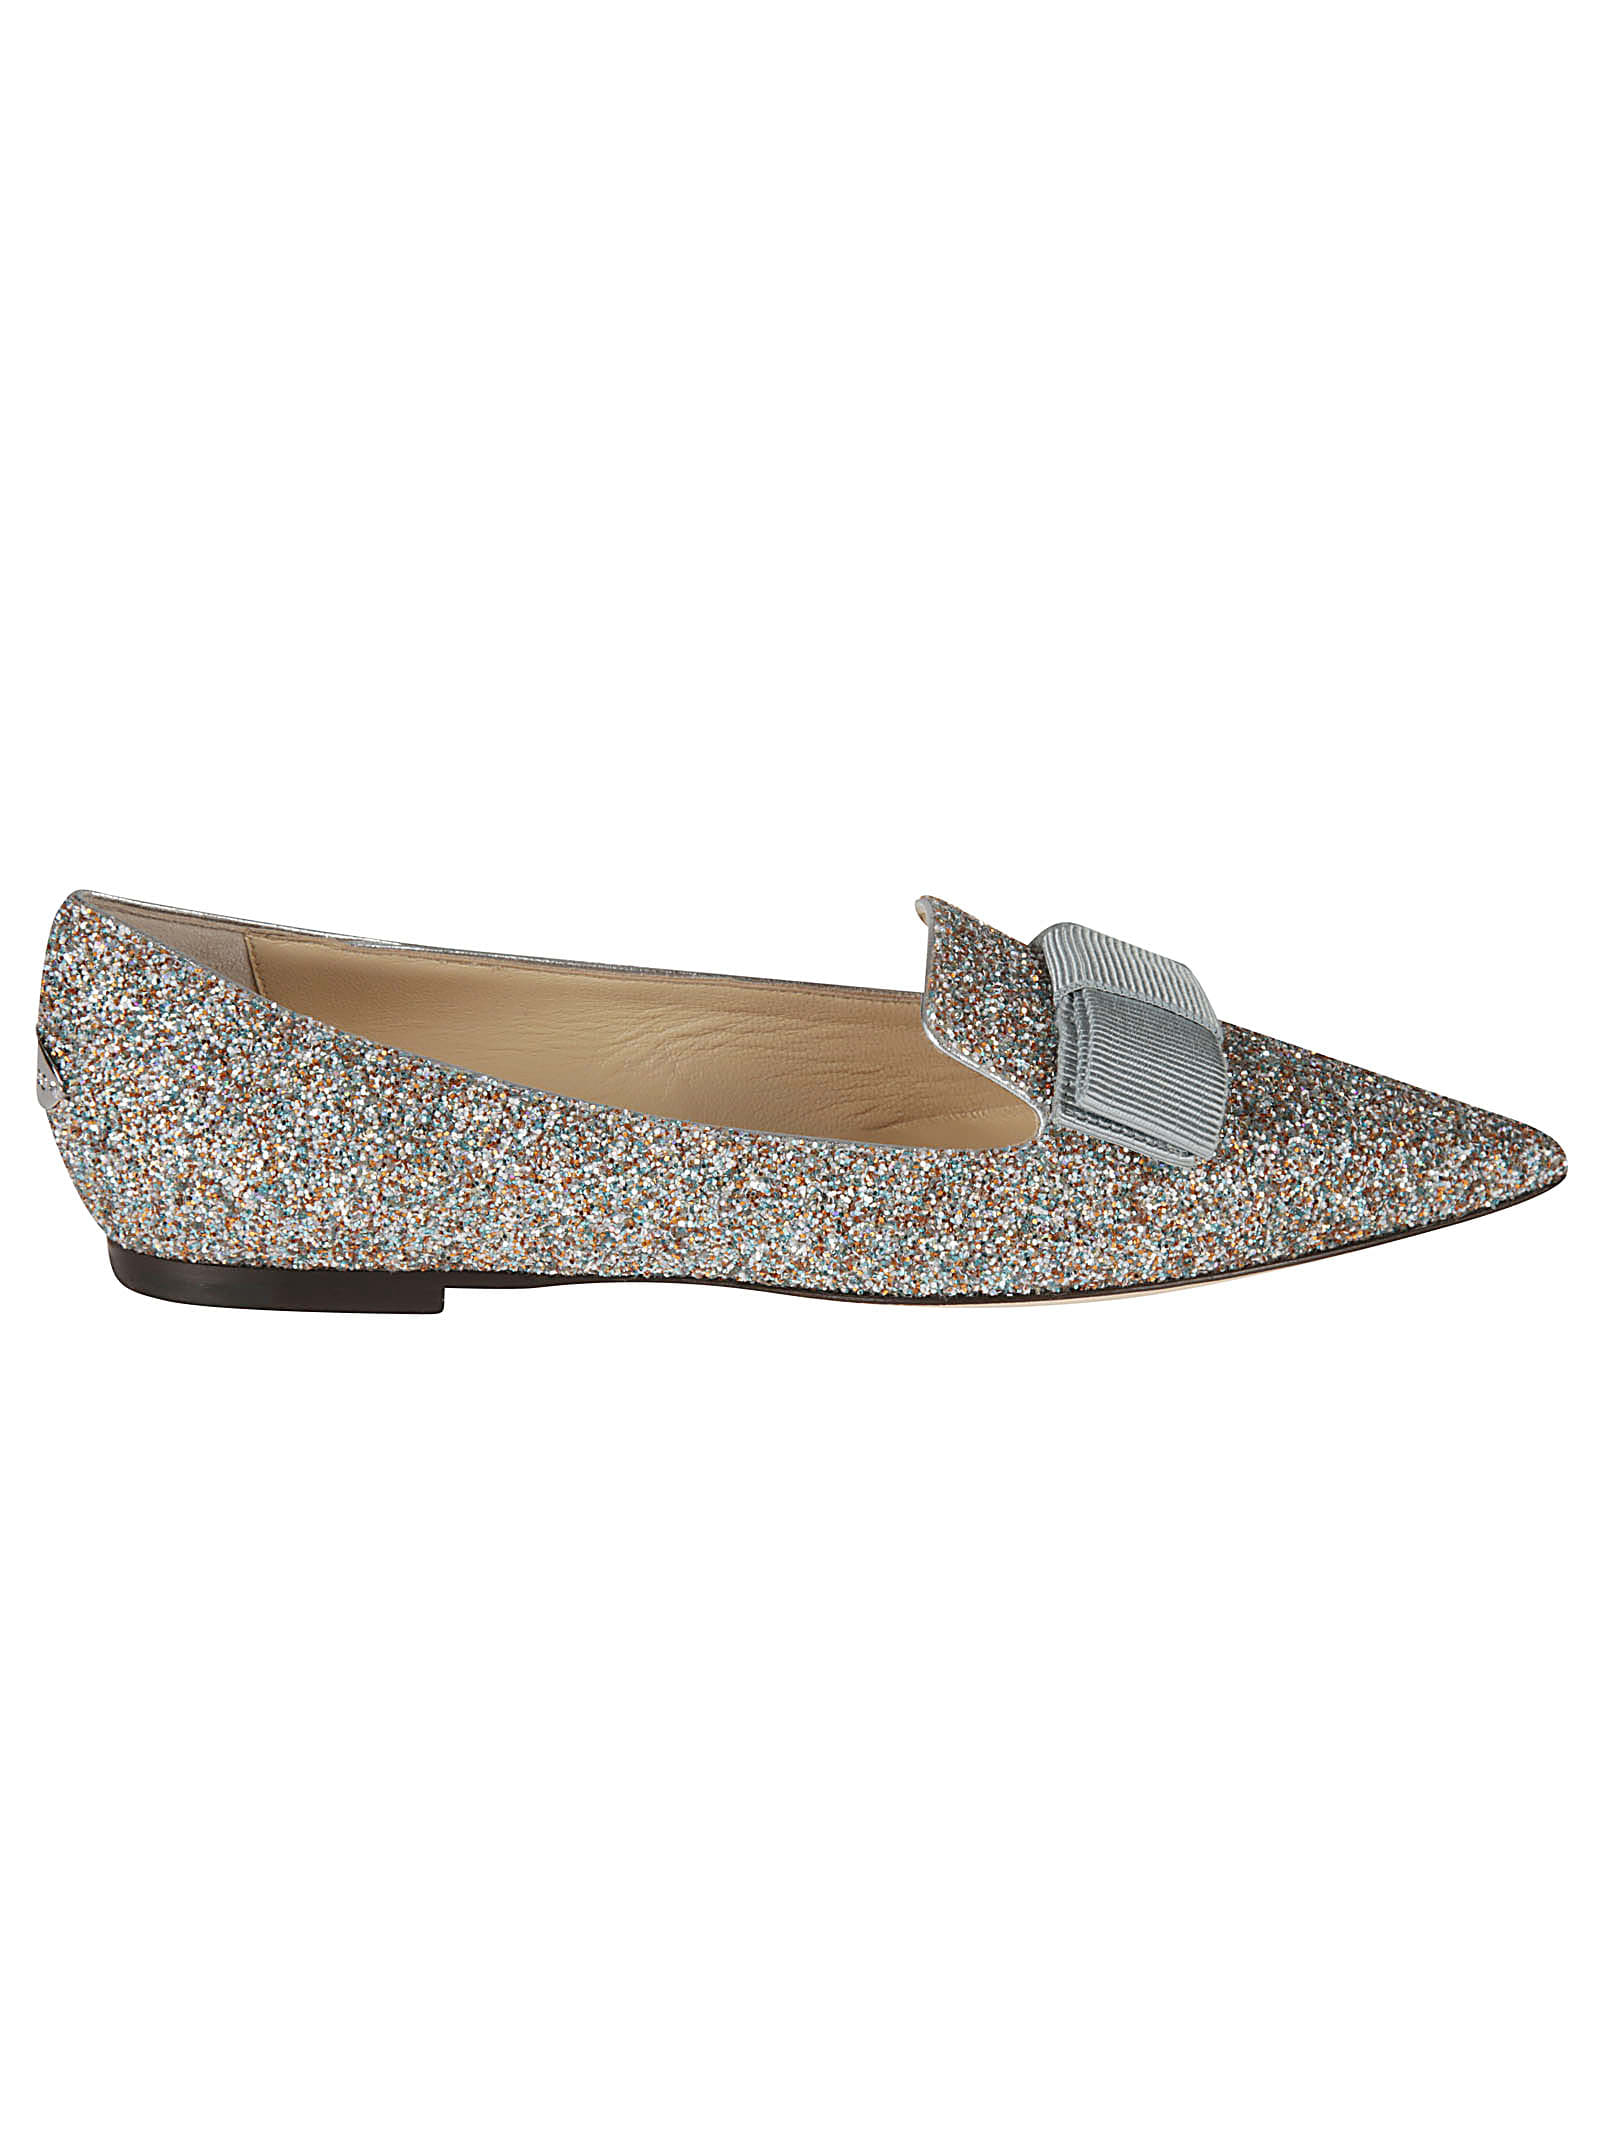 Buy Jimmy Choo Gala Slippers online, shop Jimmy Choo shoes with free shipping